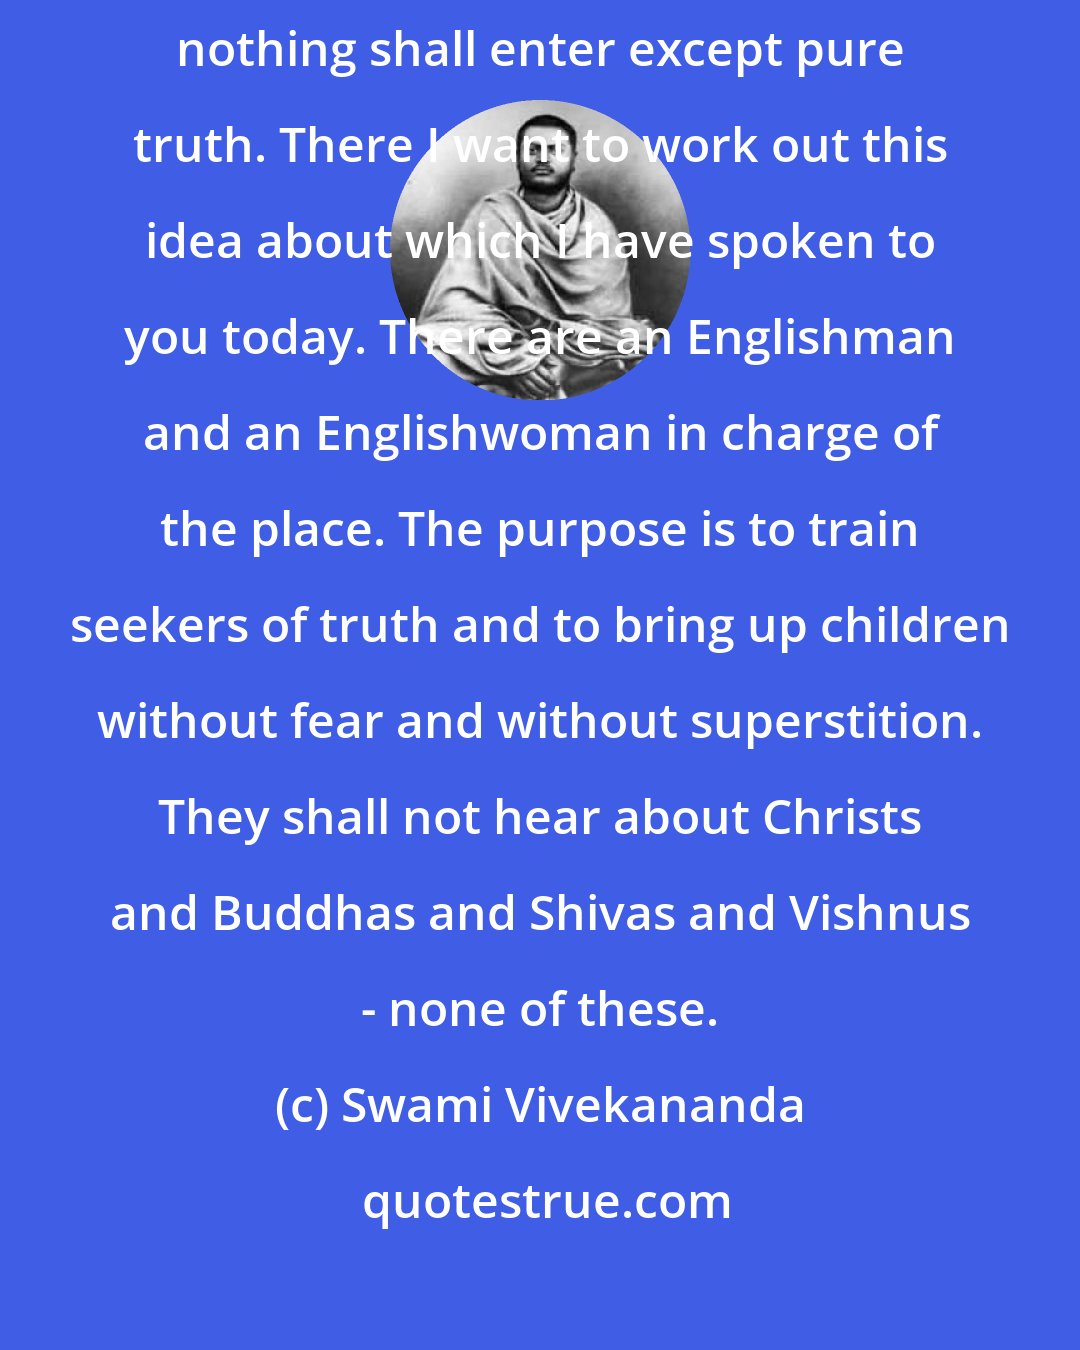 Swami Vivekananda: But on the heights of the Himalayas I have a place where I am determined nothing shall enter except pure truth. There I want to work out this idea about which I have spoken to you today. There are an Englishman and an Englishwoman in charge of the place. The purpose is to train seekers of truth and to bring up children without fear and without superstition. They shall not hear about Christs and Buddhas and Shivas and Vishnus - none of these.